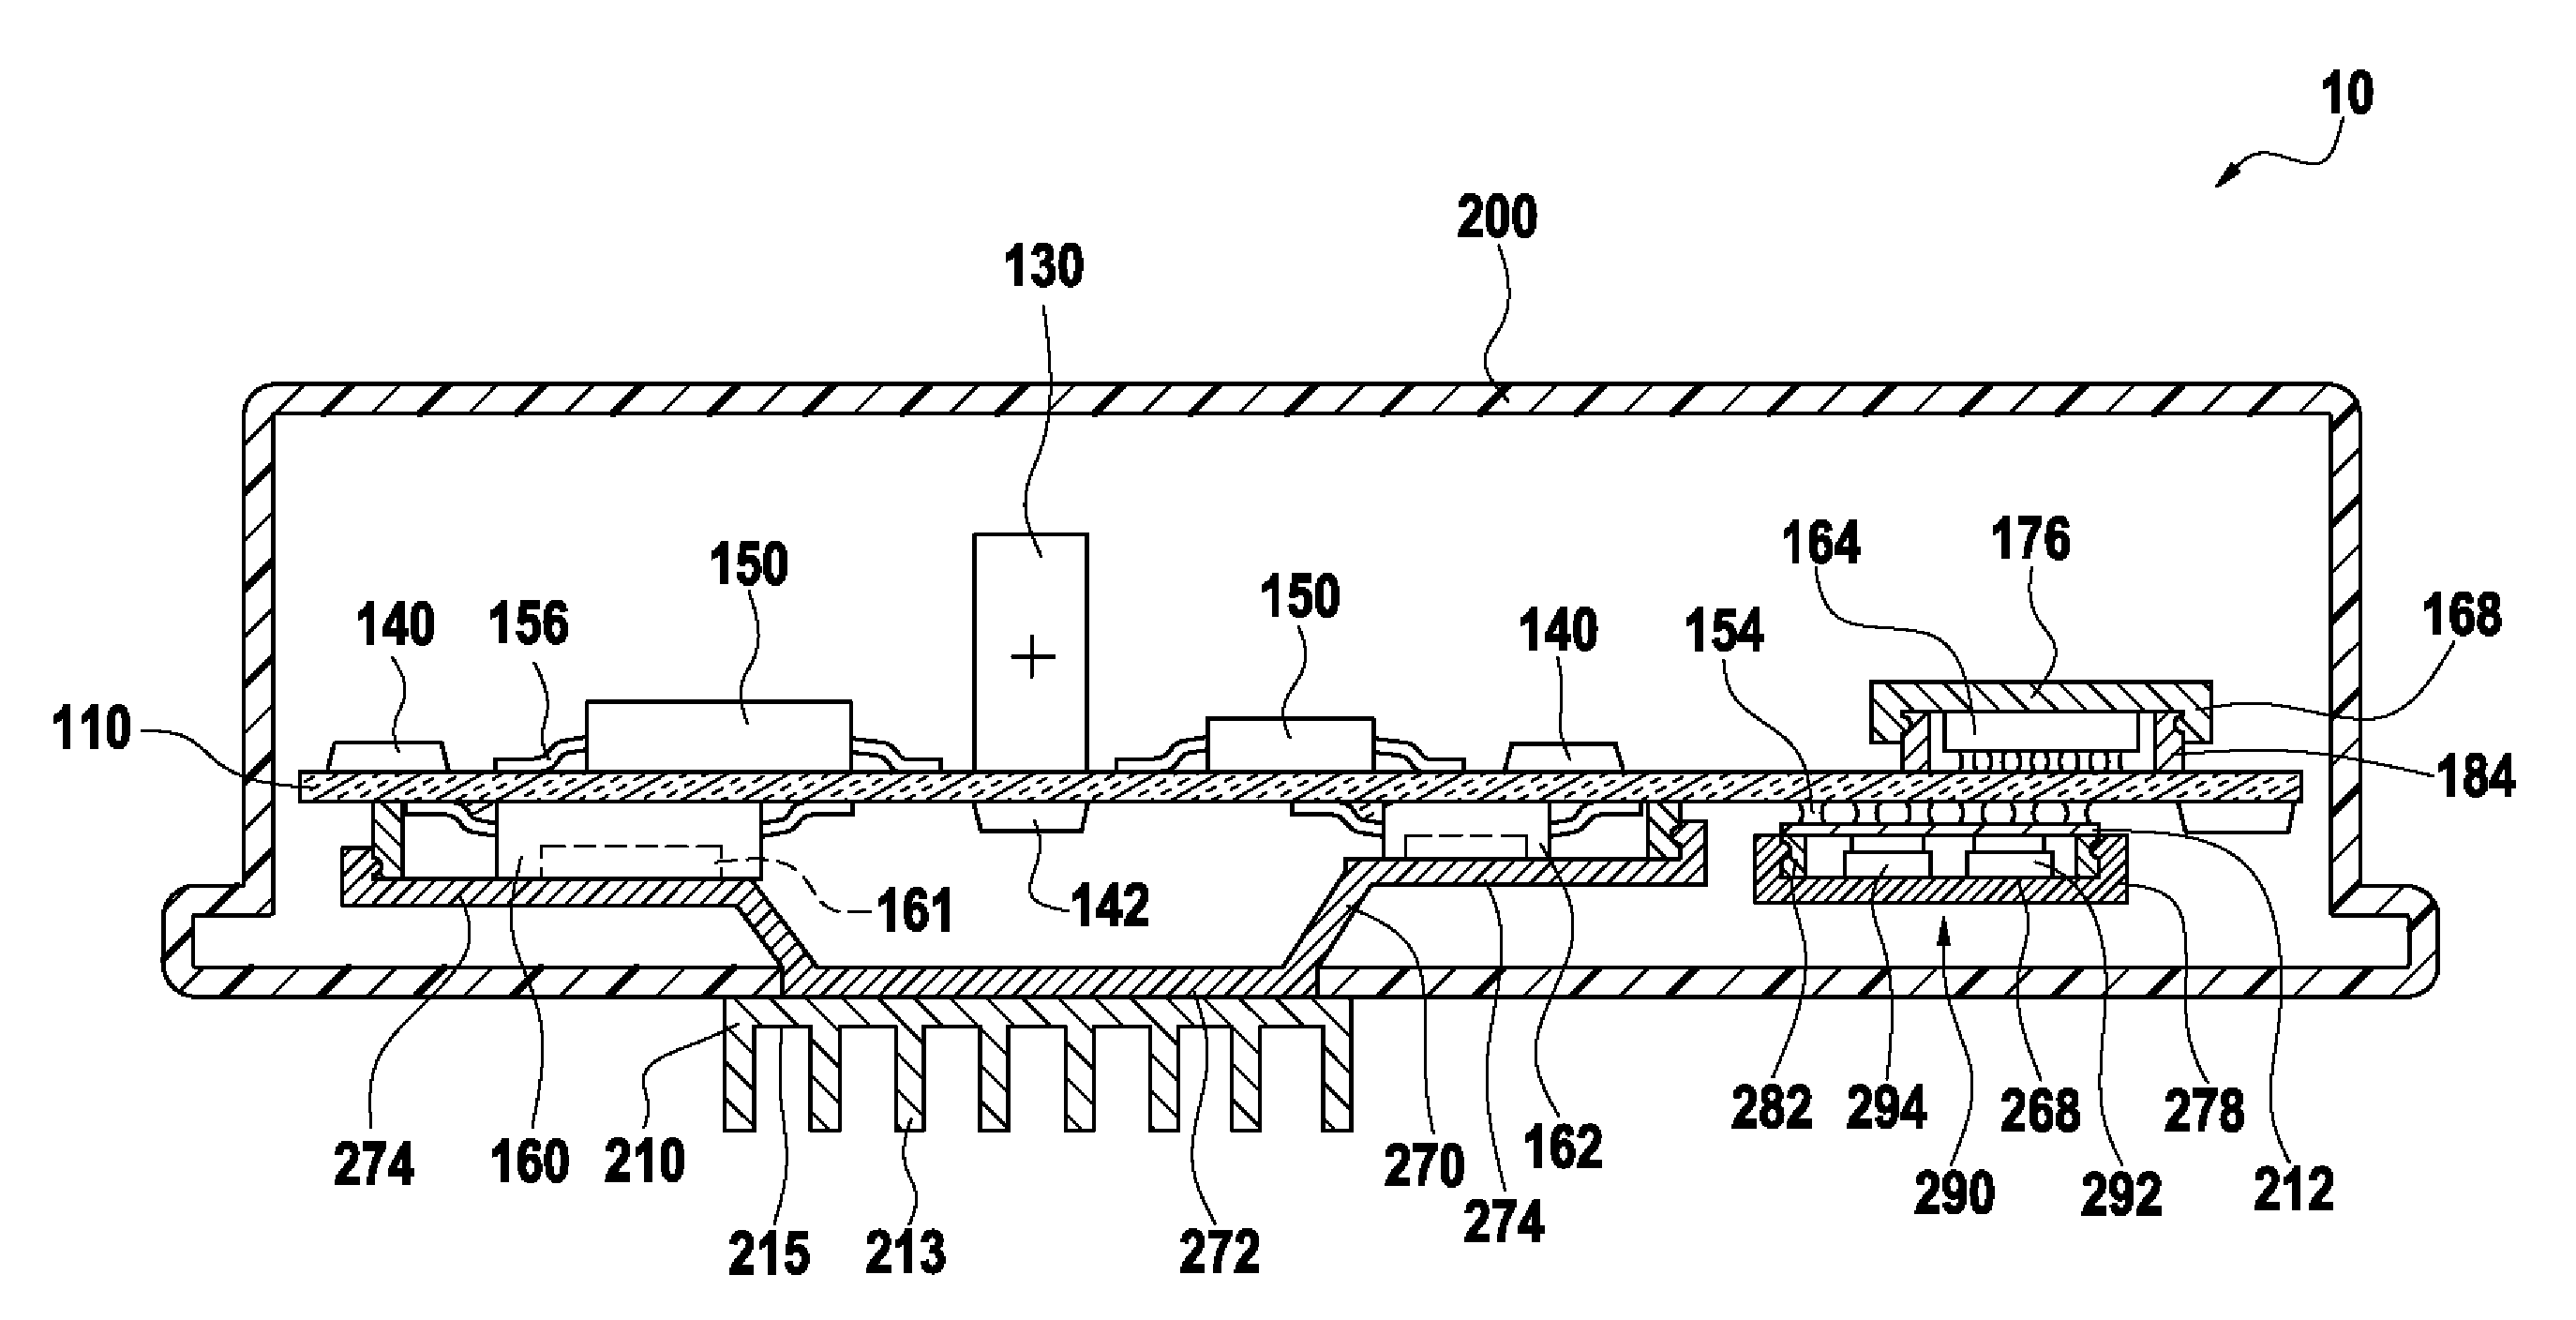 Electronic control device